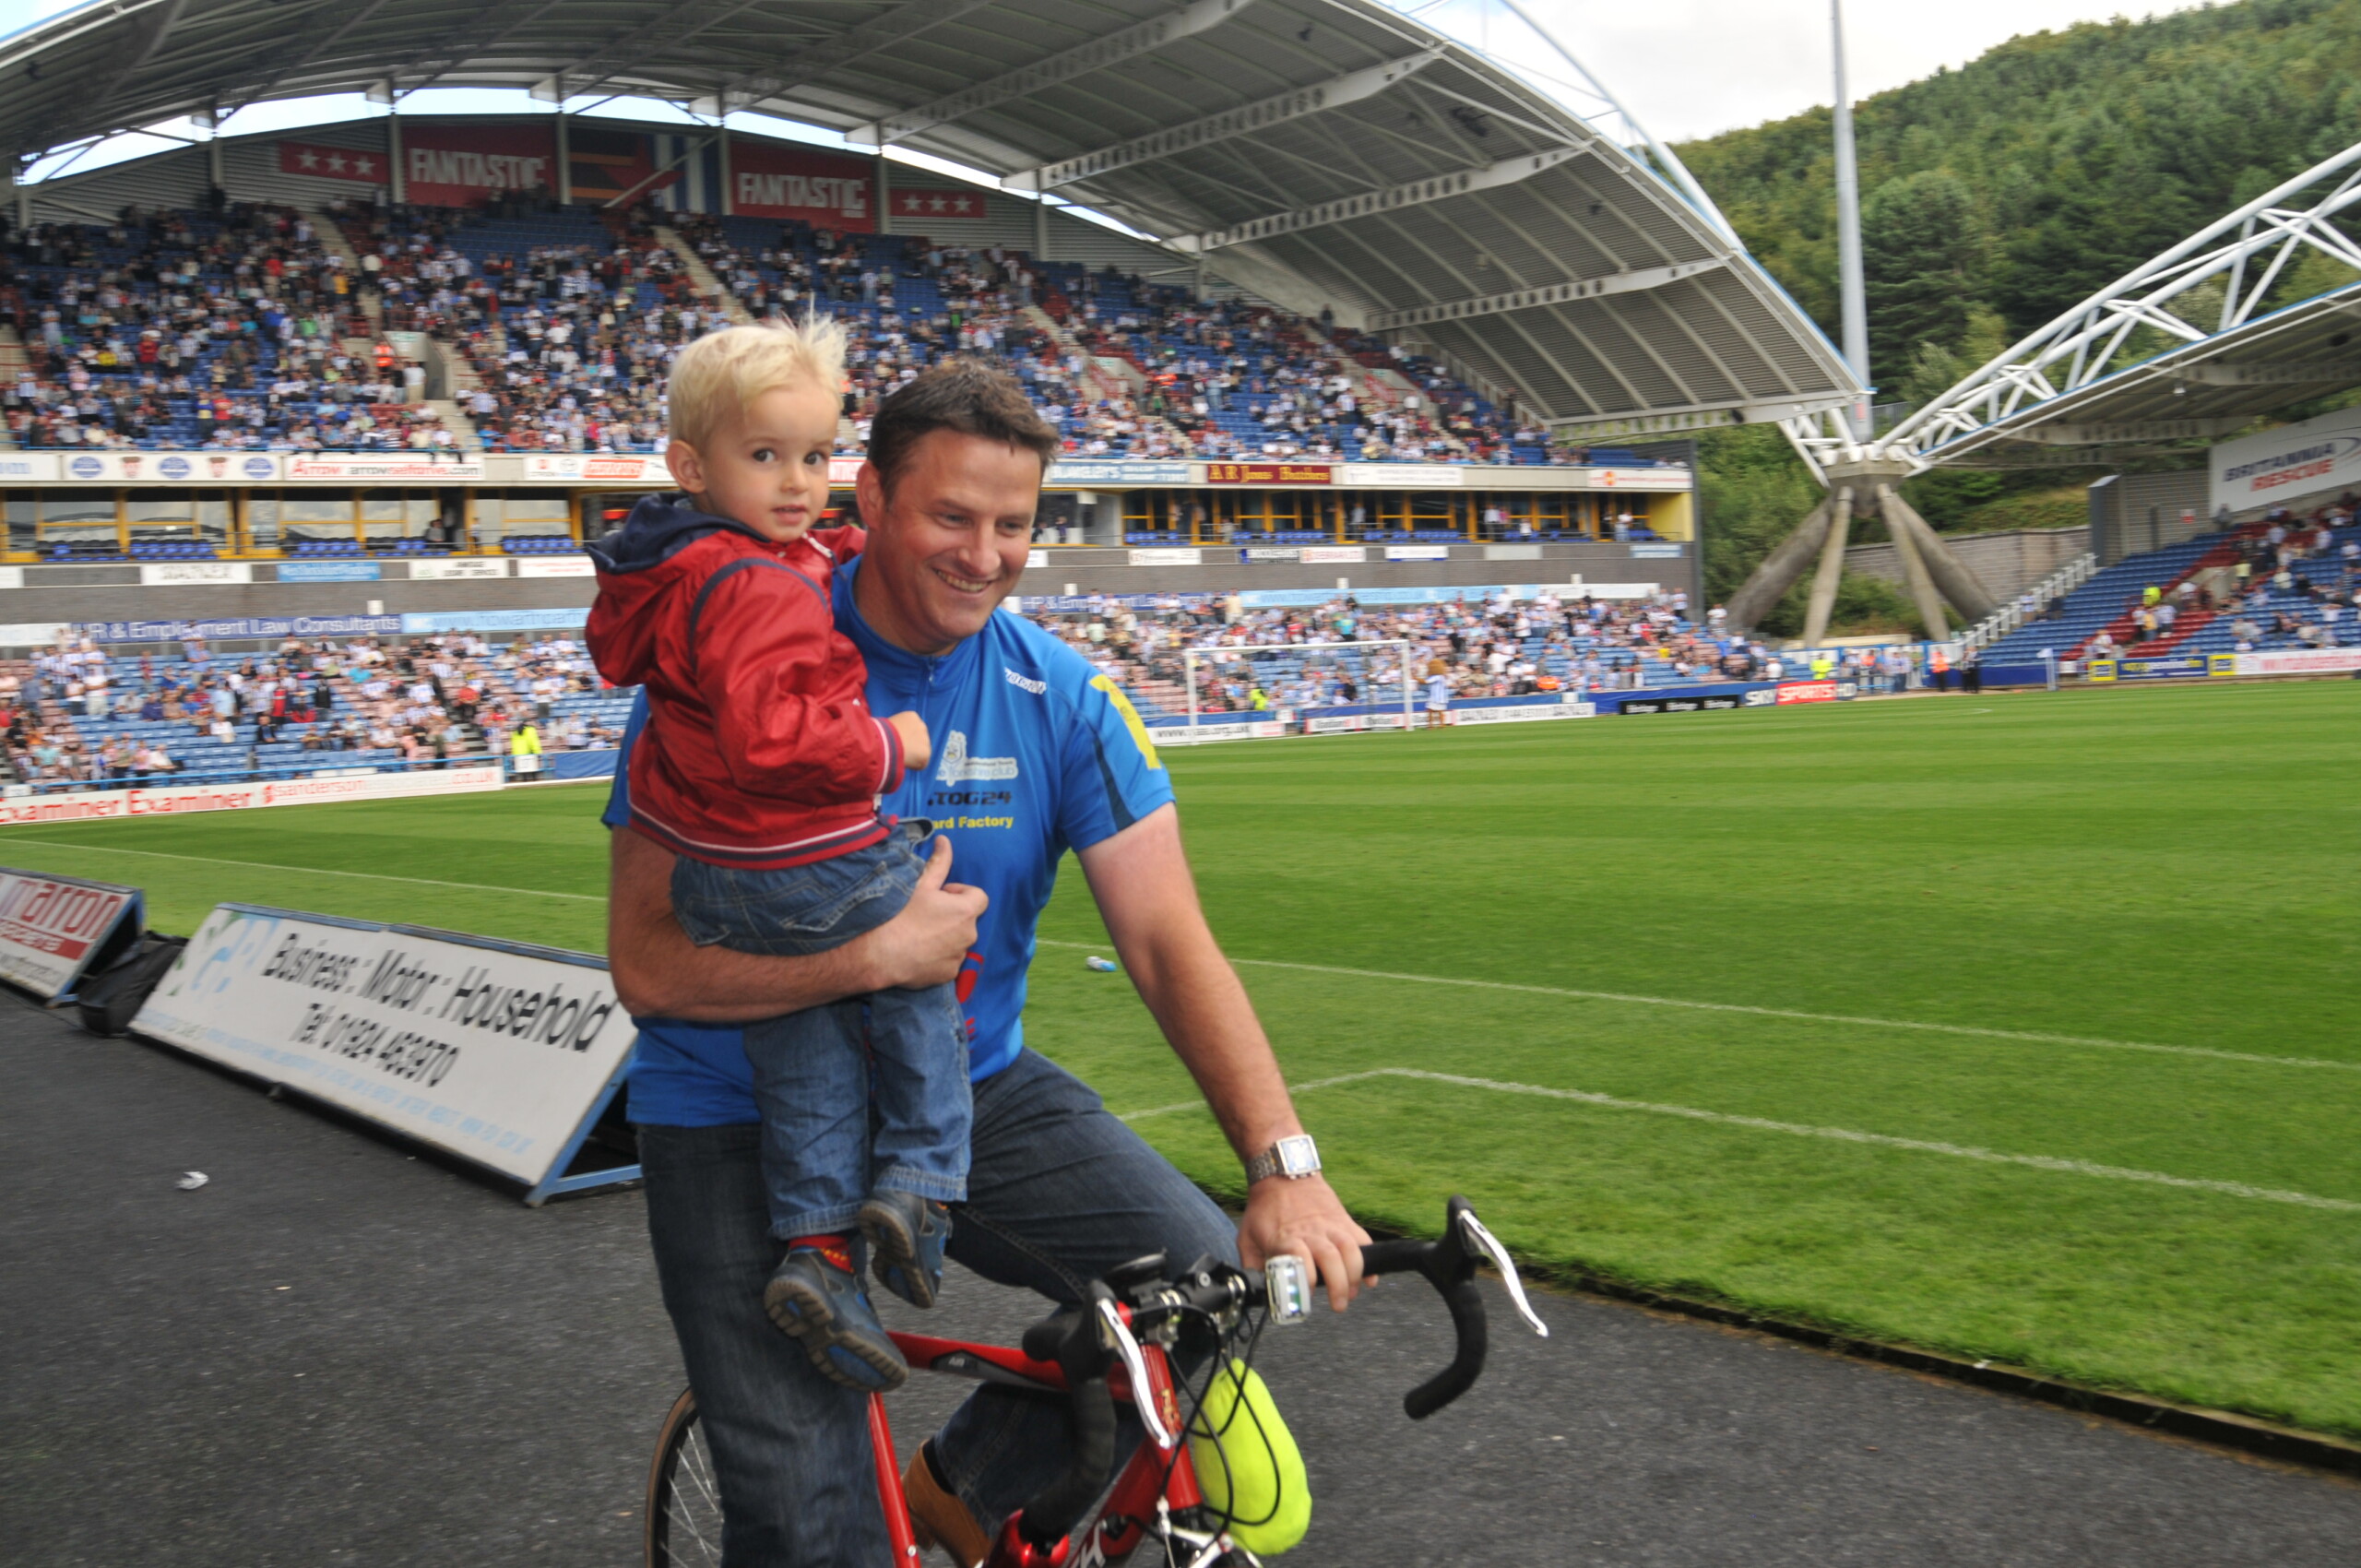 David fryer with hold his son on a bike